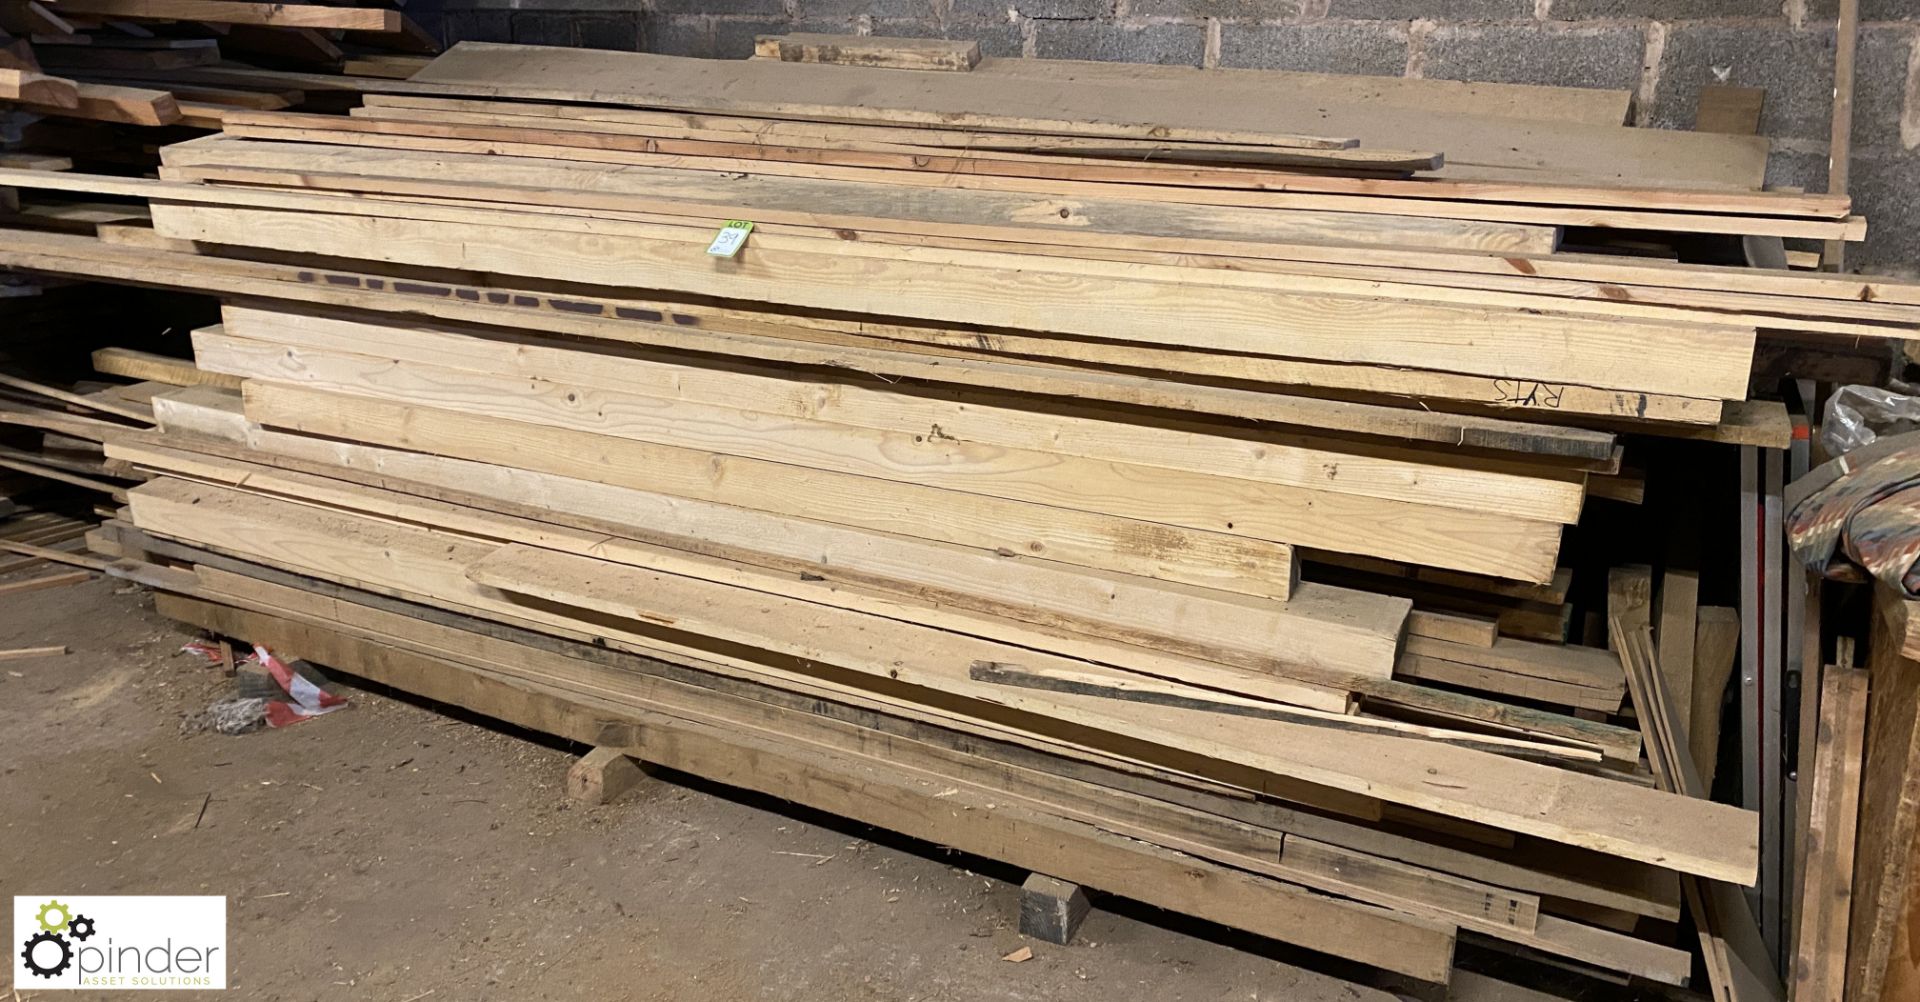 Large quantity Softwood/Hardwood Cut Beams, Boards and Lengths, up to 4000mm